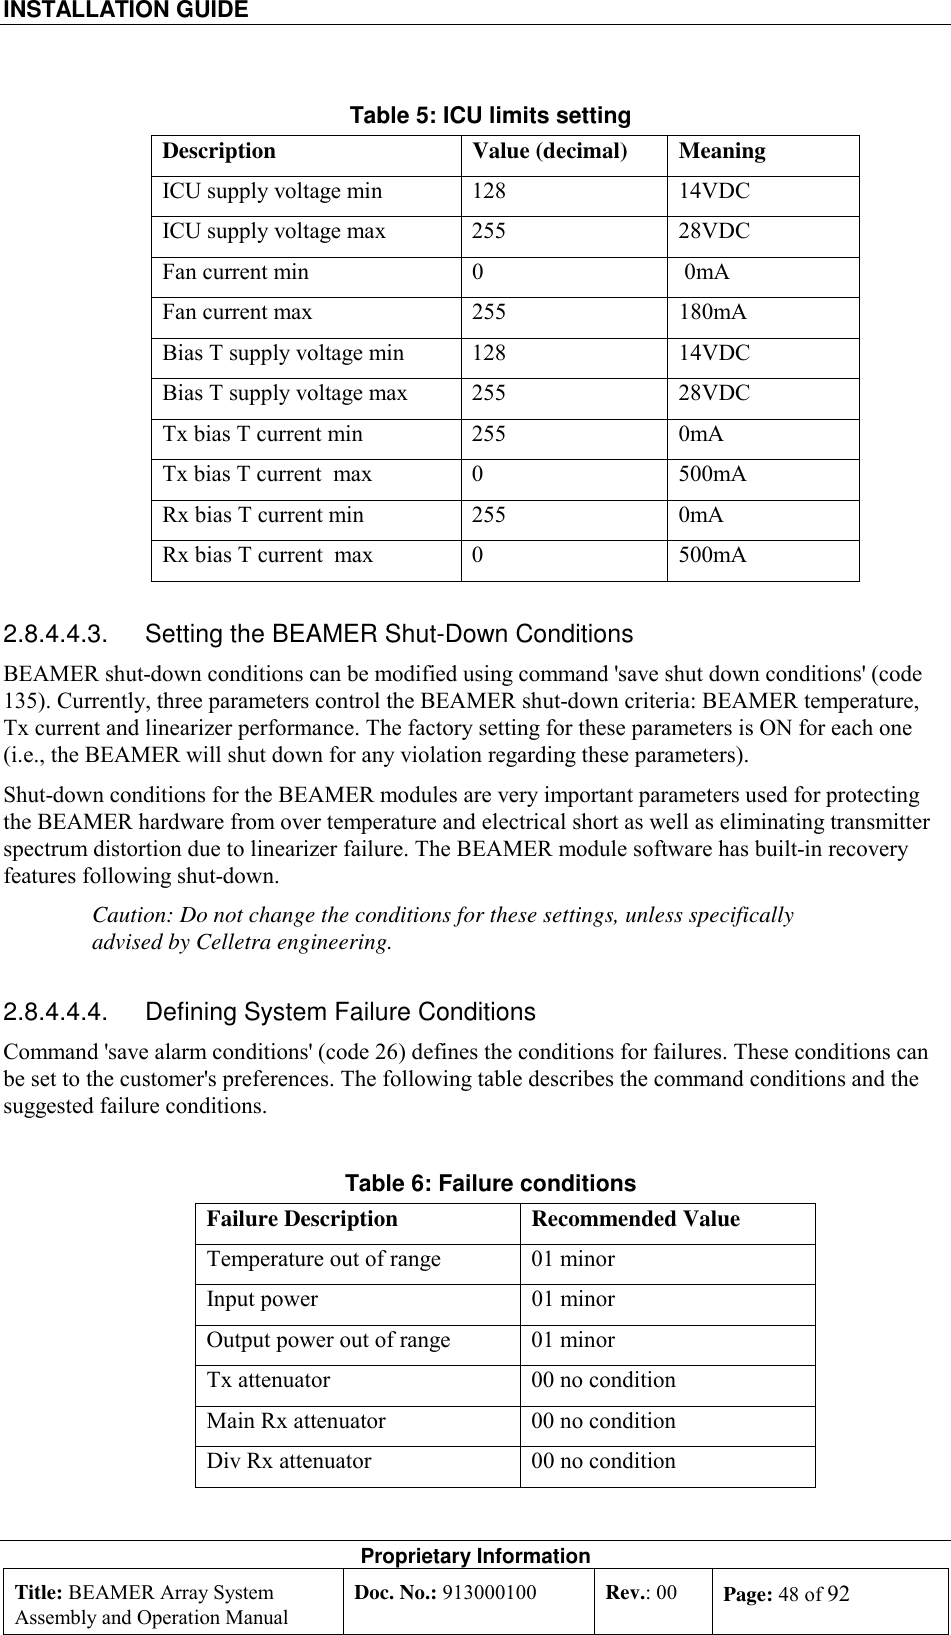 INSTALLATION GUIDE    Proprietary Information Title: BEAMER Array System Assembly and Operation Manual Doc. No.: 913000100  Rev.: 00  Page: 48 of 92  Table 5: ICU limits setting Description Value (decimal) Meaning ICU supply voltage min  128  14VDC ICU supply voltage max  255  28VDC Fan current min   0   0mA Fan current max  255  180mA Bias T supply voltage min  128  14VDC Bias T supply voltage max  255  28VDC Tx bias T current min   255    0mA Tx bias T current  max  0    500mA Rx bias T current min   255    0mA Rx bias T current  max  0    500mA 2.8.4.4.3.  Setting the BEAMER Shut-Down Conditions BEAMER shut-down conditions can be modified using command &apos;save shut down conditions&apos; (code 135). Currently, three parameters control the BEAMER shut-down criteria: BEAMER temperature, Tx current and linearizer performance. The factory setting for these parameters is ON for each one (i.e., the BEAMER will shut down for any violation regarding these parameters). Shut-down conditions for the BEAMER modules are very important parameters used for protecting the BEAMER hardware from over temperature and electrical short as well as eliminating transmitter spectrum distortion due to linearizer failure. The BEAMER module software has built-in recovery features following shut-down. Caution: Do not change the conditions for these settings, unless specifically advised by Celletra engineering. 2.8.4.4.4.  Defining System Failure Conditions Command &apos;save alarm conditions&apos; (code 26) defines the conditions for failures. These conditions can be set to the customer&apos;s preferences. The following table describes the command conditions and the suggested failure conditions. Table 6: Failure conditions Failure Description  Recommended Value Temperature out of range  01 minor Input power   01 minor Output power out of range  01 minor Tx attenuator  00 no condition Main Rx attenuator  00 no condition Div Rx attenuator  00 no condition 